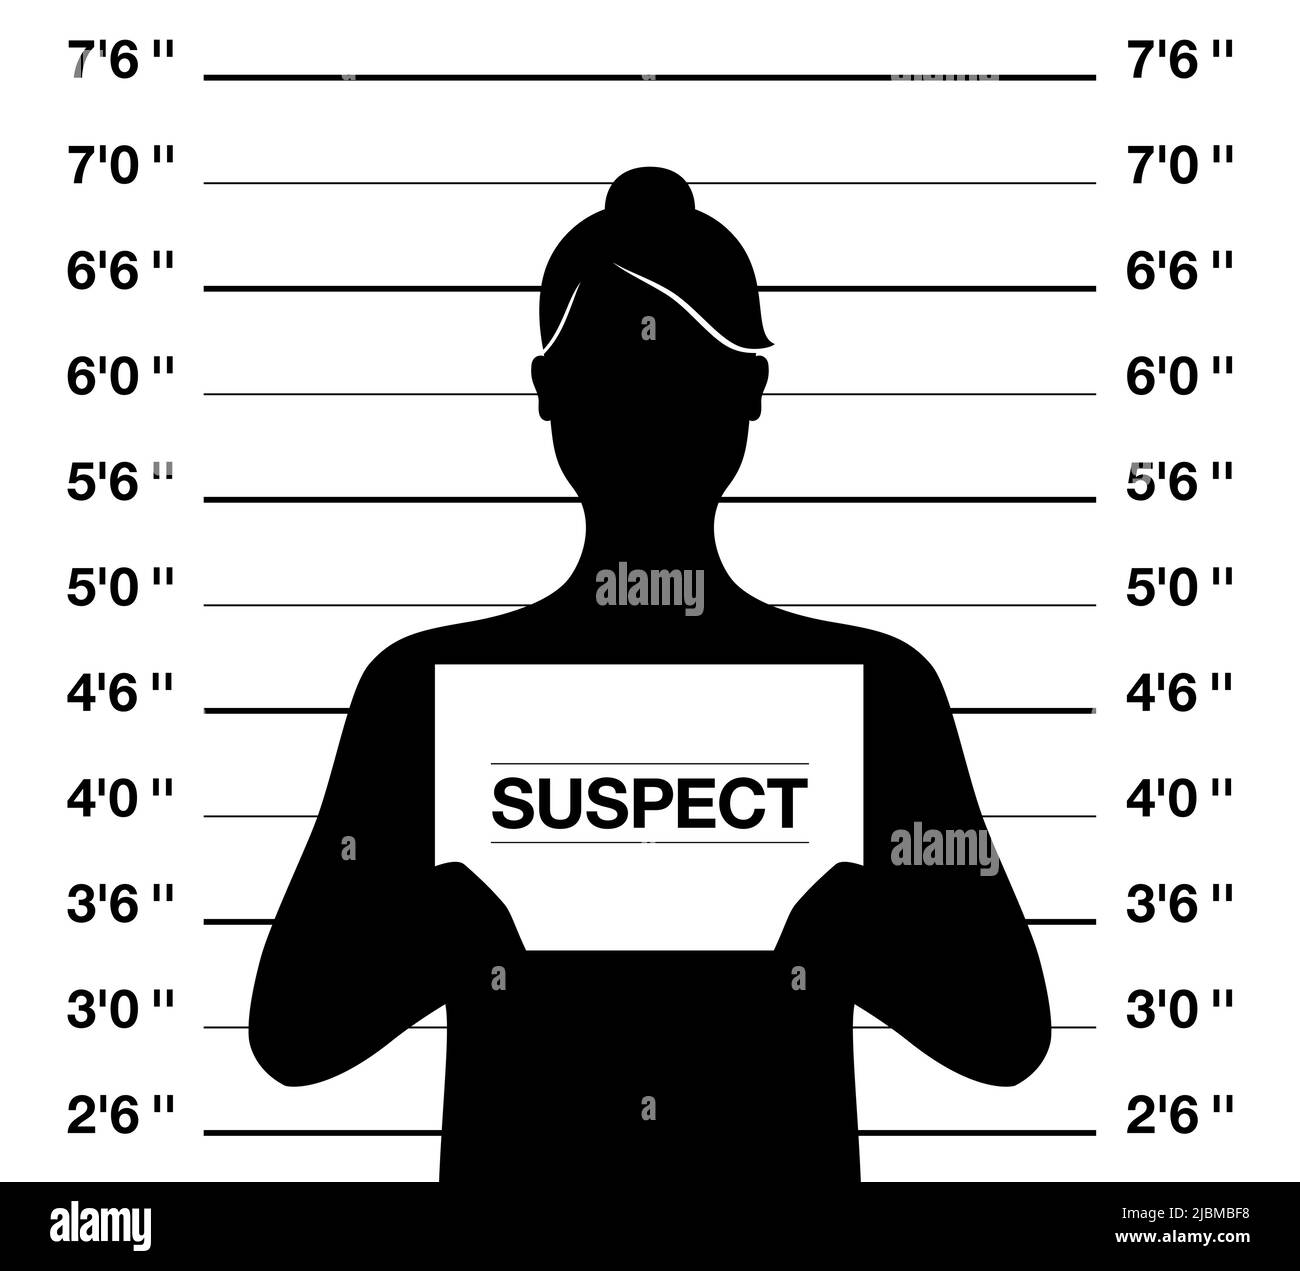 Female suspect mugshot, vector illustration. Anonymus woman standing on a criminal photo shooting background. Stock Vector